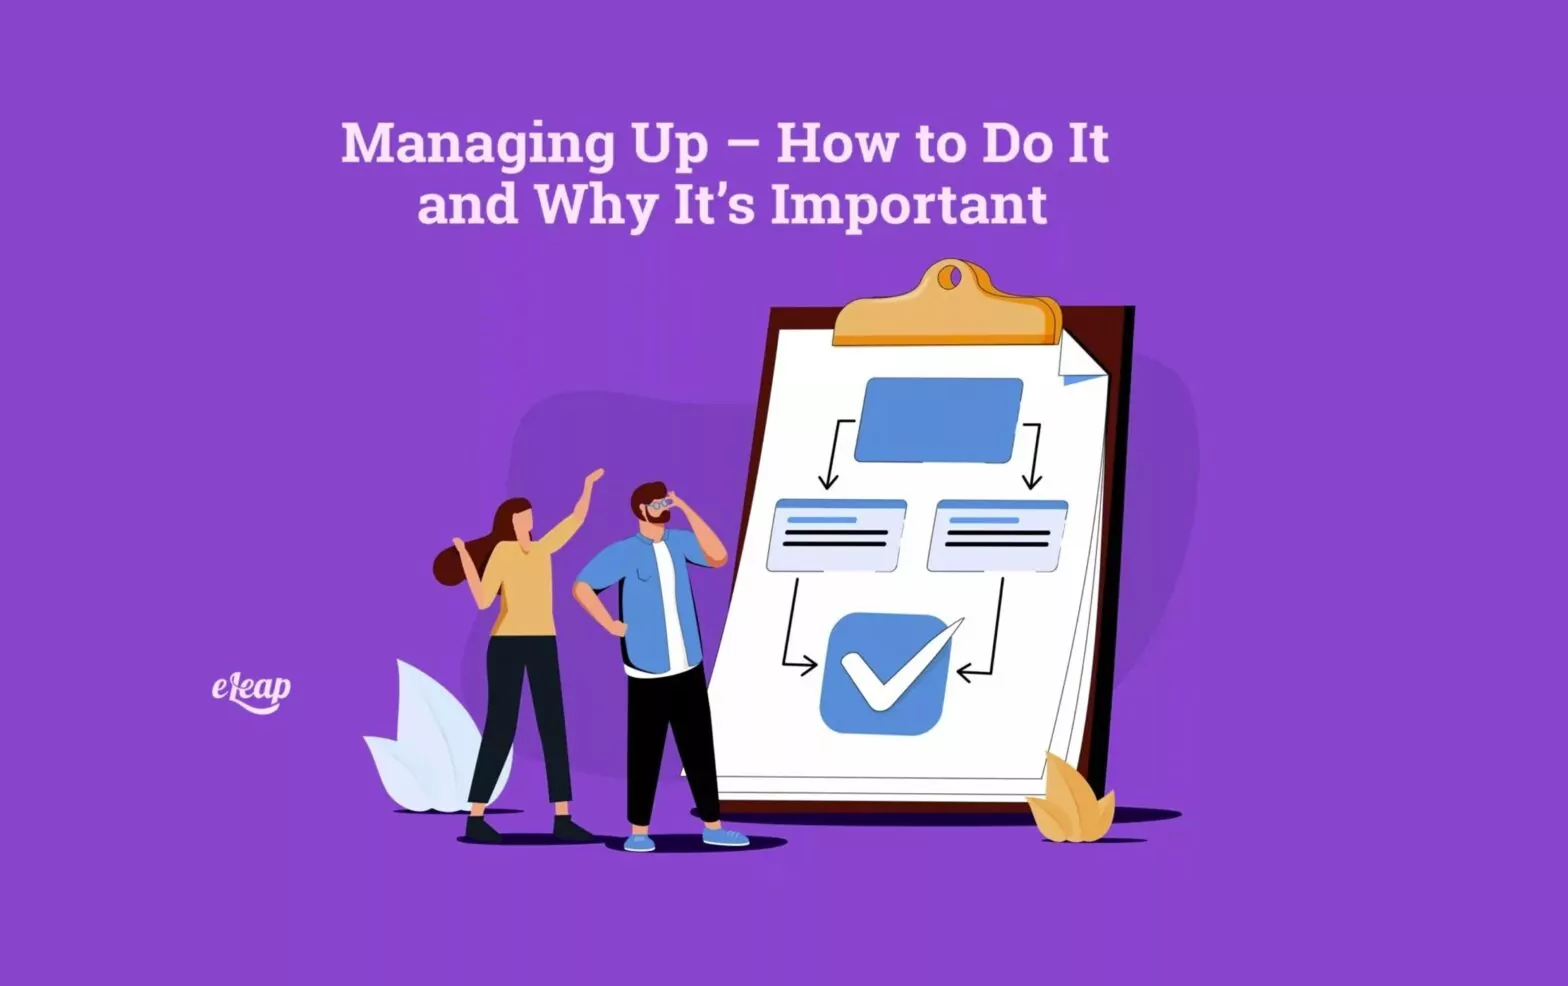 Managing Up – How to Do It and Why It’s Important